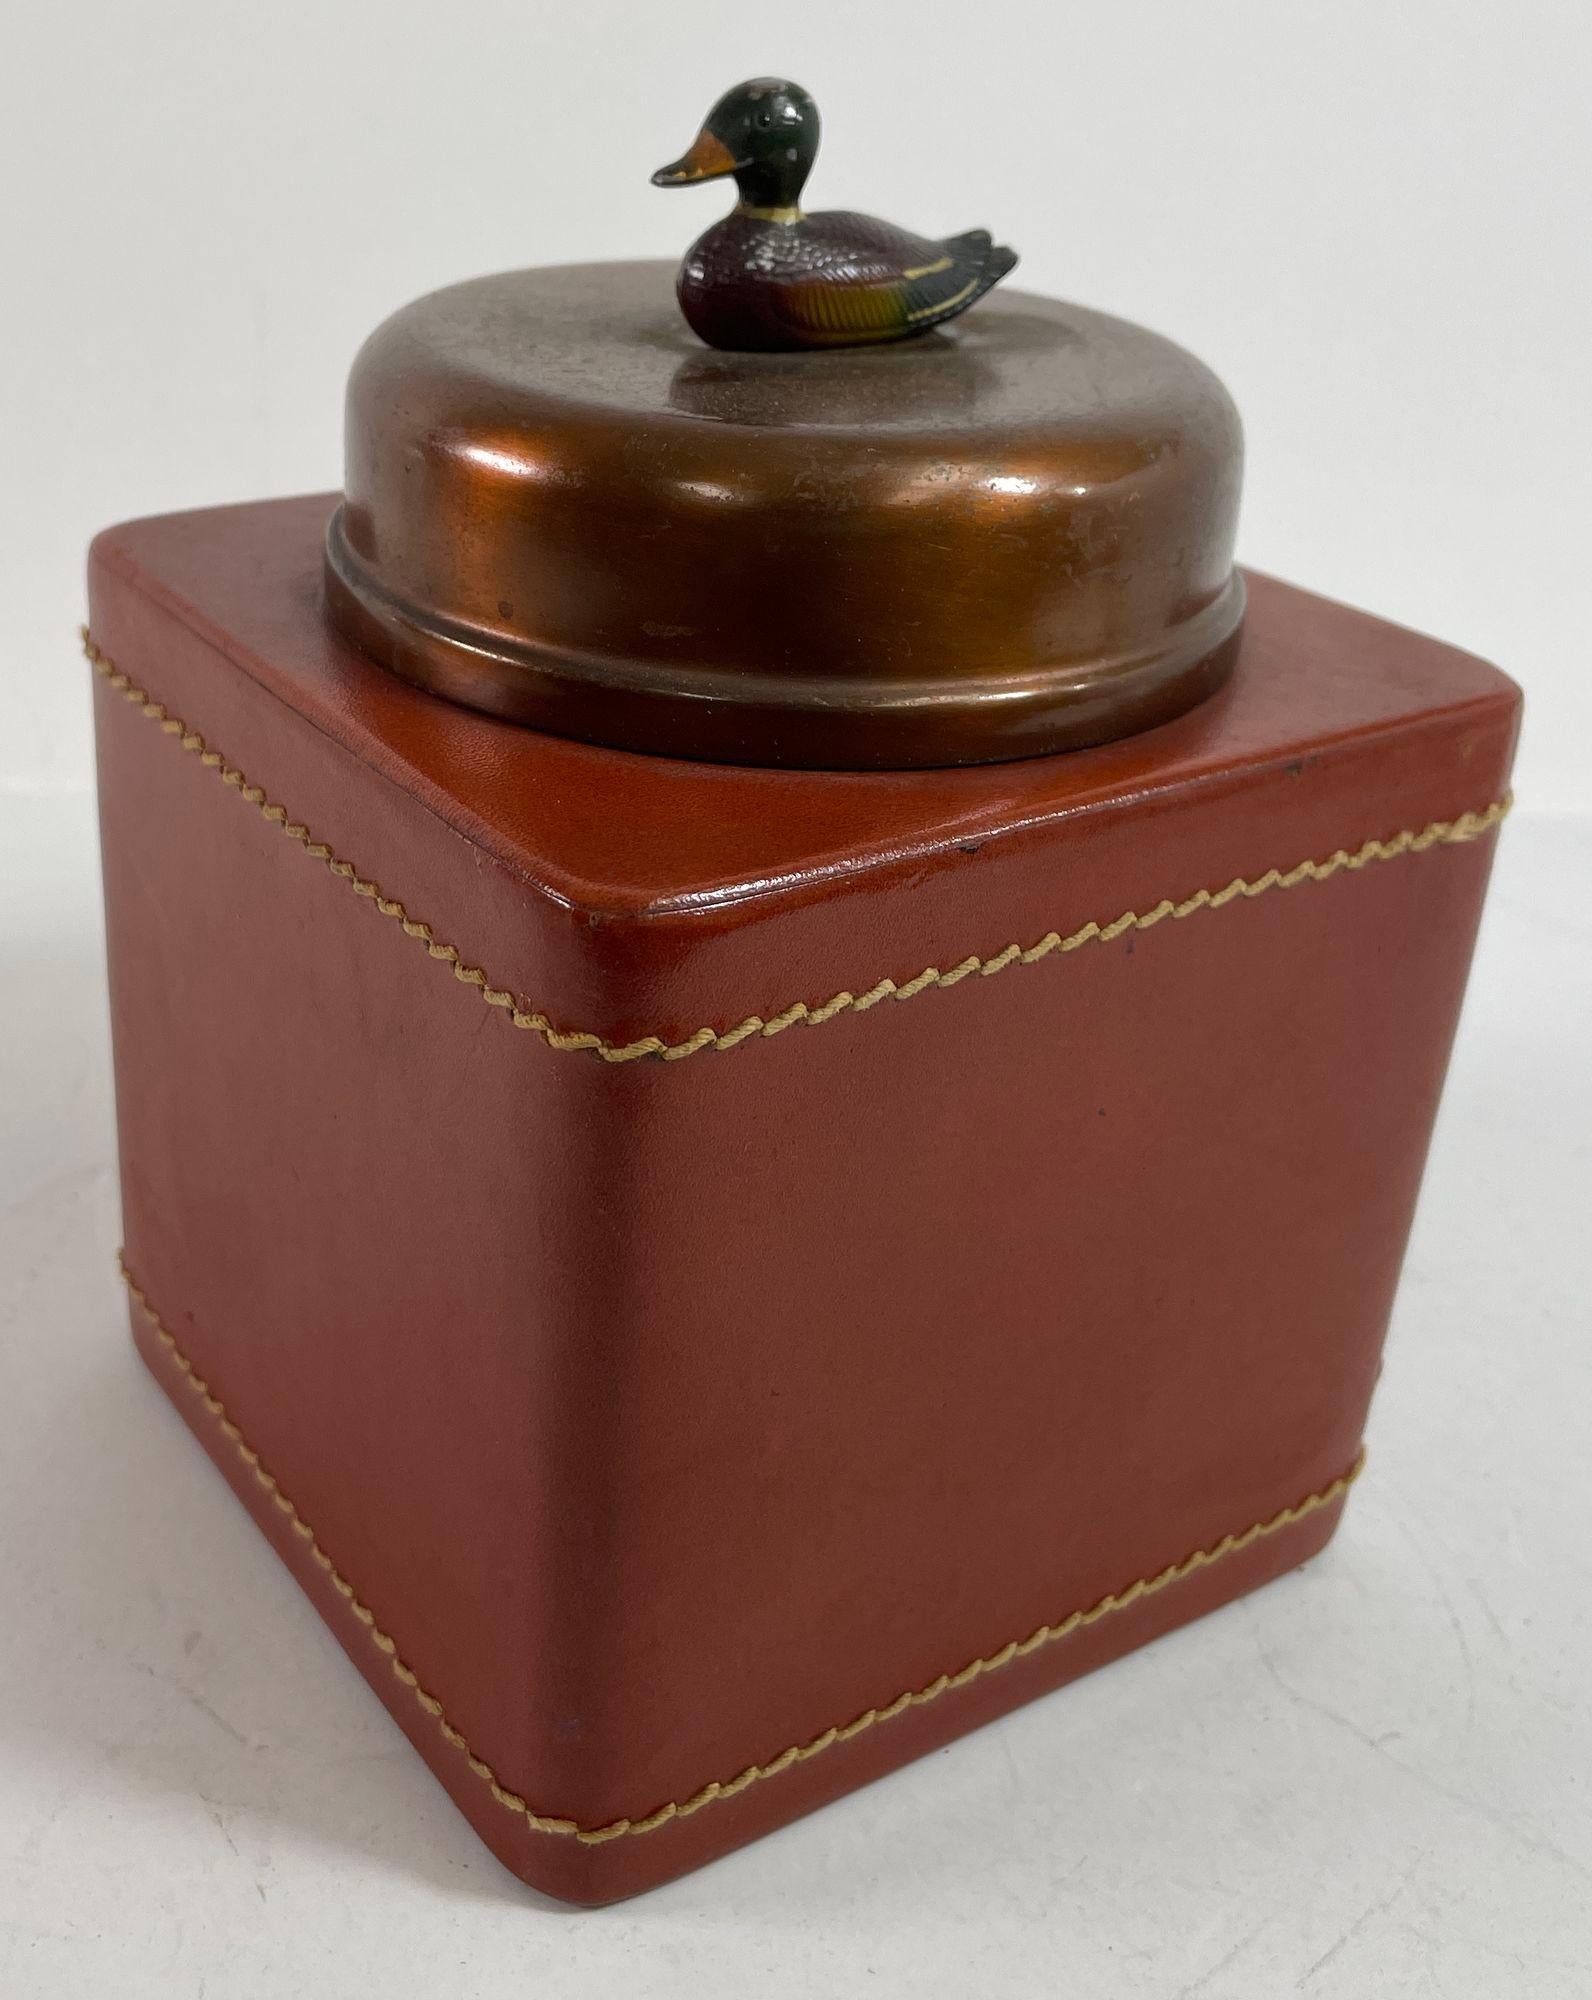 Vintage Traditional  Leather Wrapped Tobacco Humidor Jar with Mallard Duck top In Good Condition For Sale In North Hollywood, CA